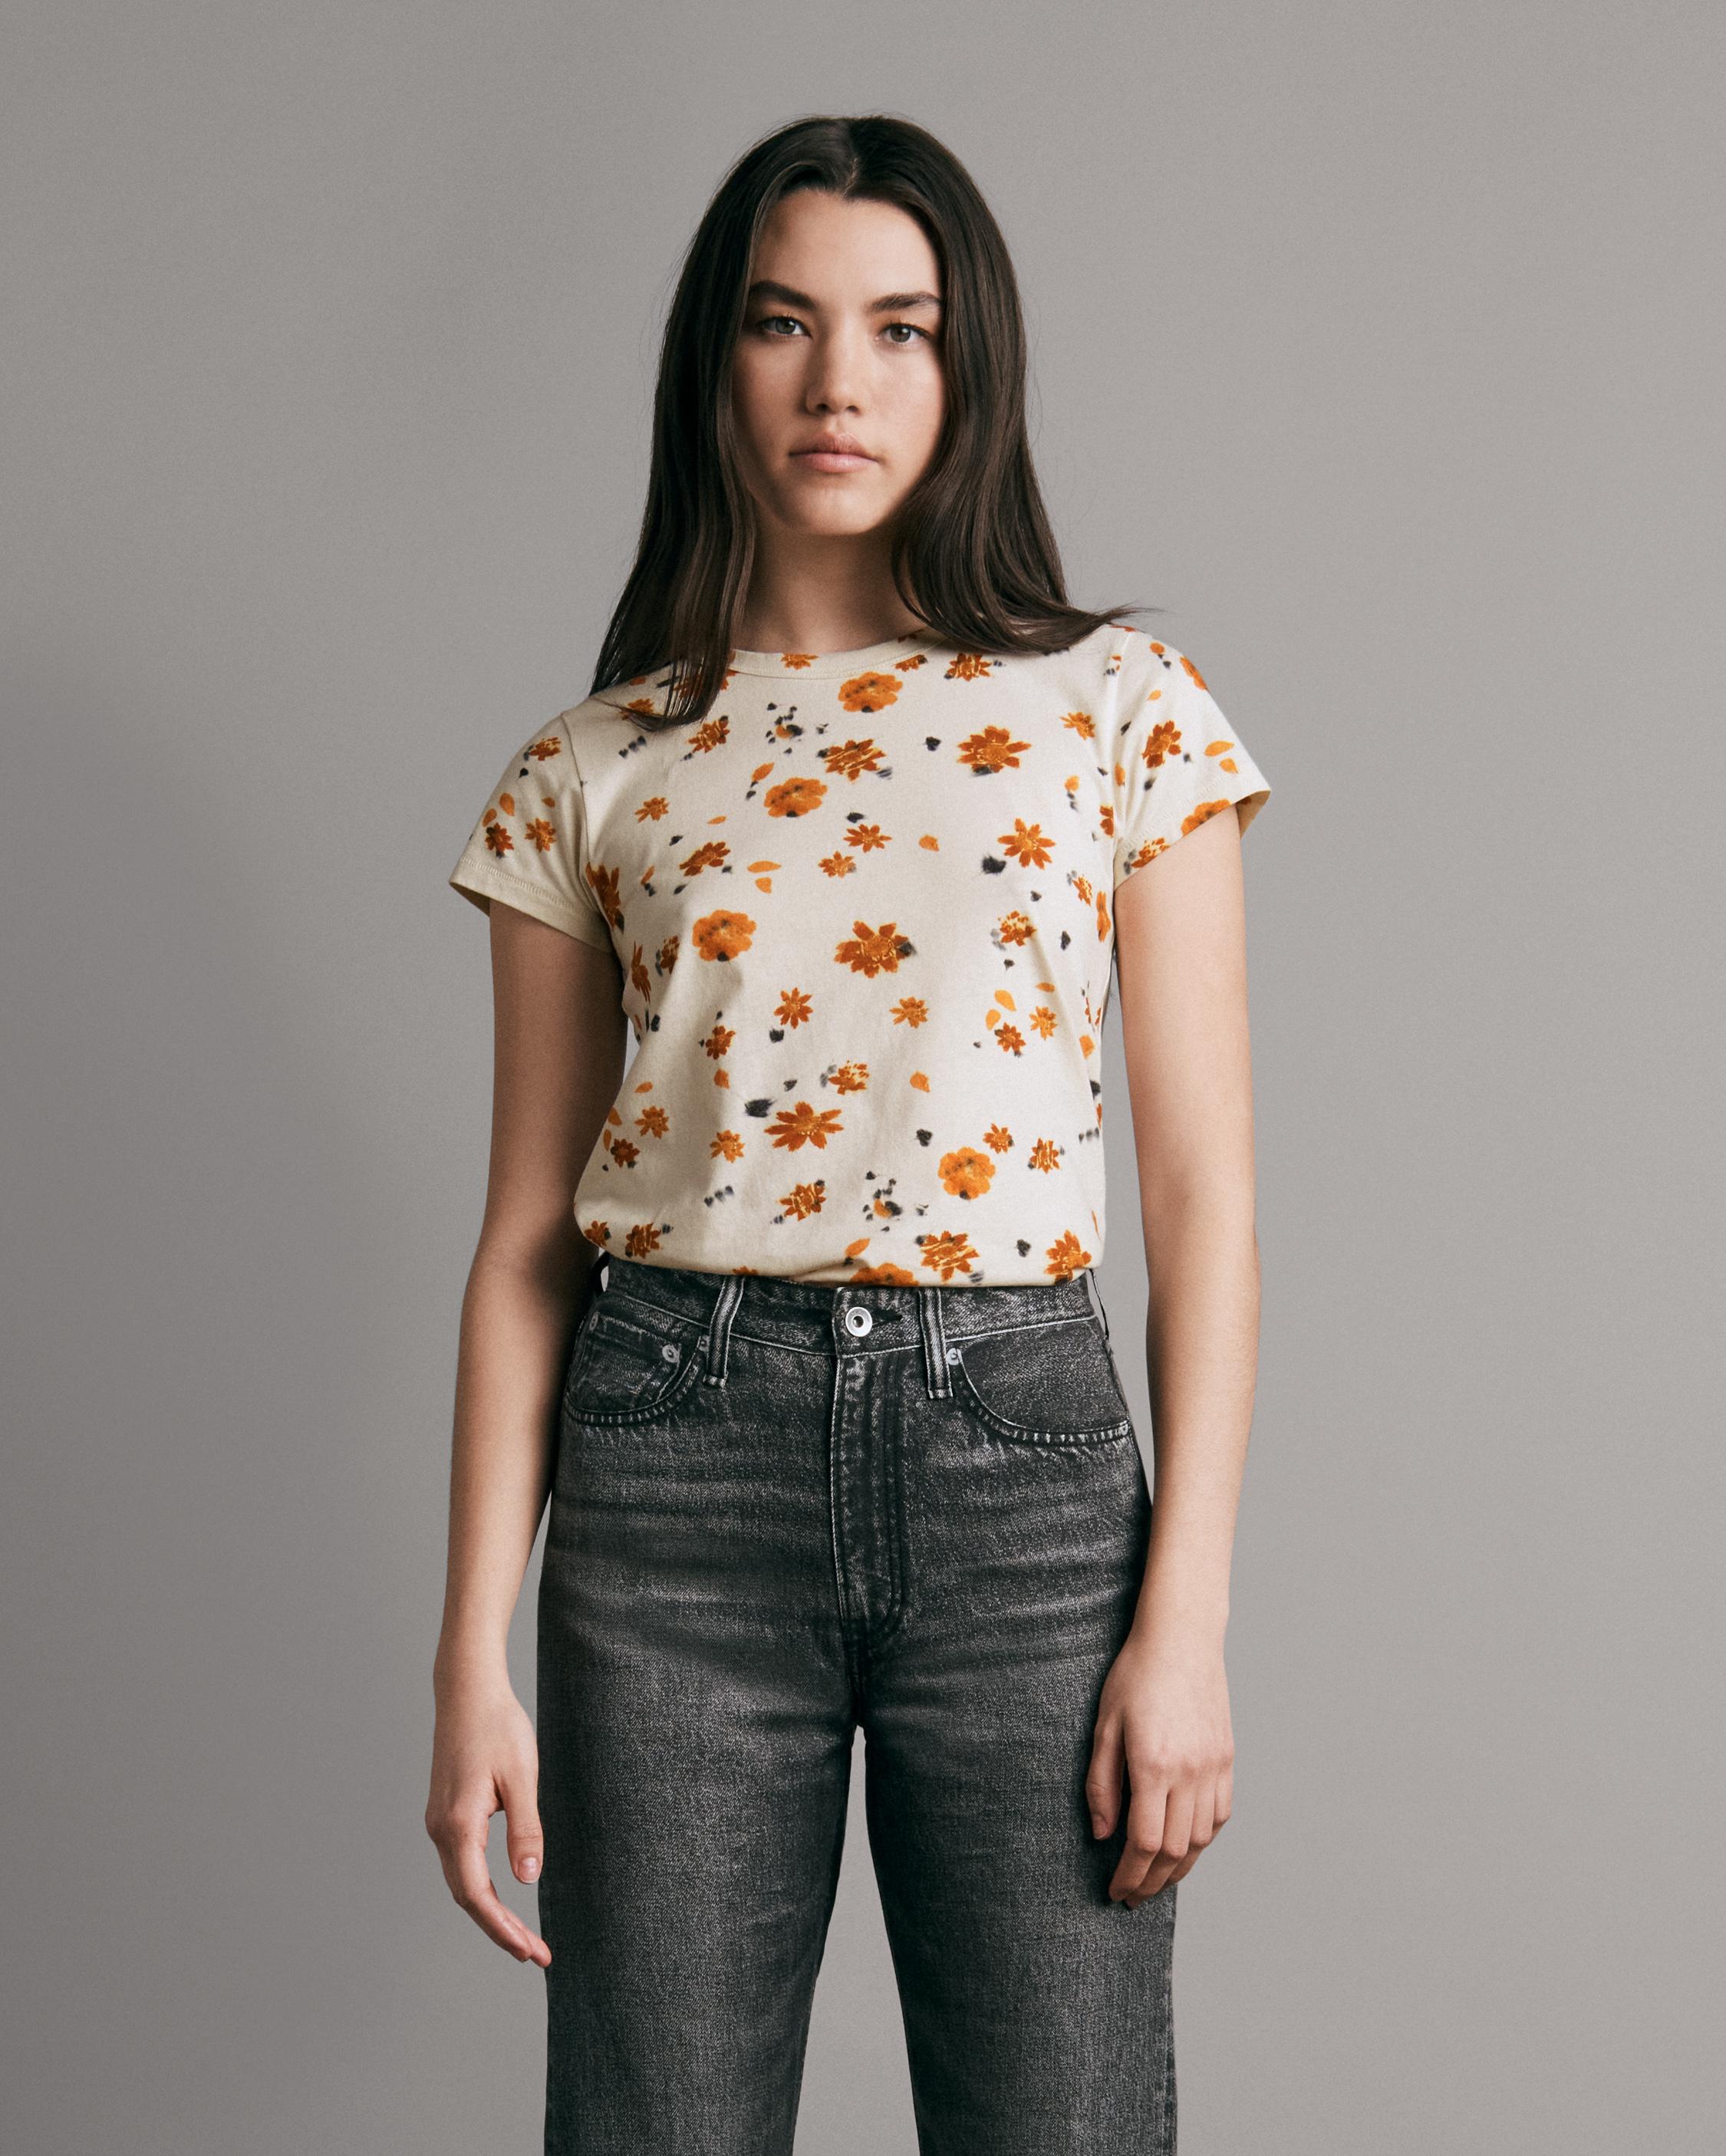 & - Tee All | bone Over Ivory Floral rag